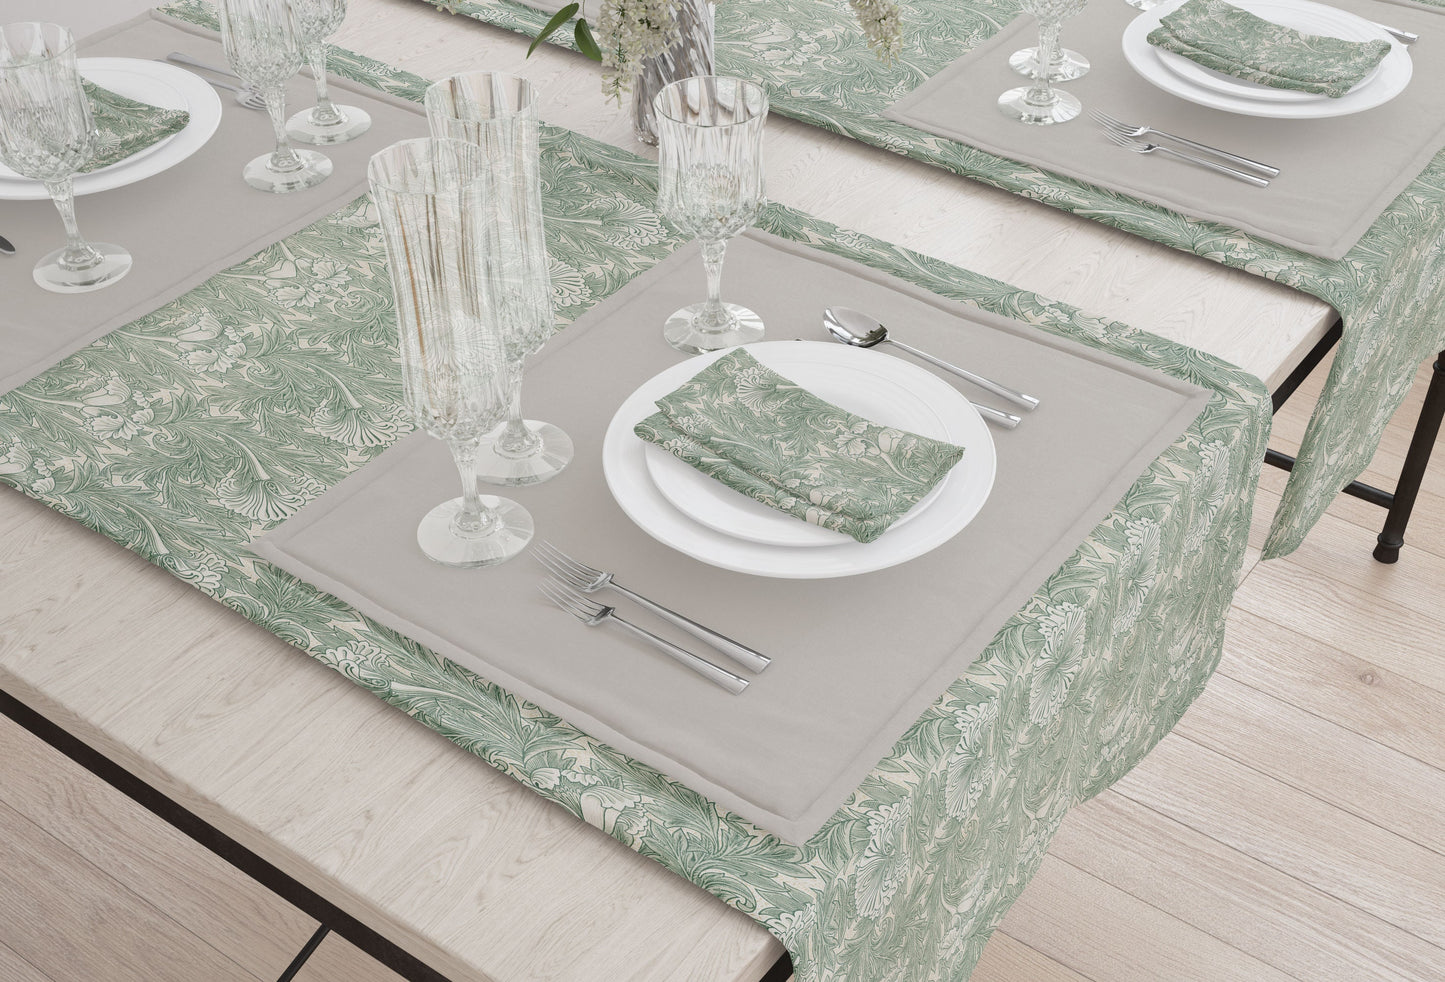 Linen Napkins, Placemats, Table Runners